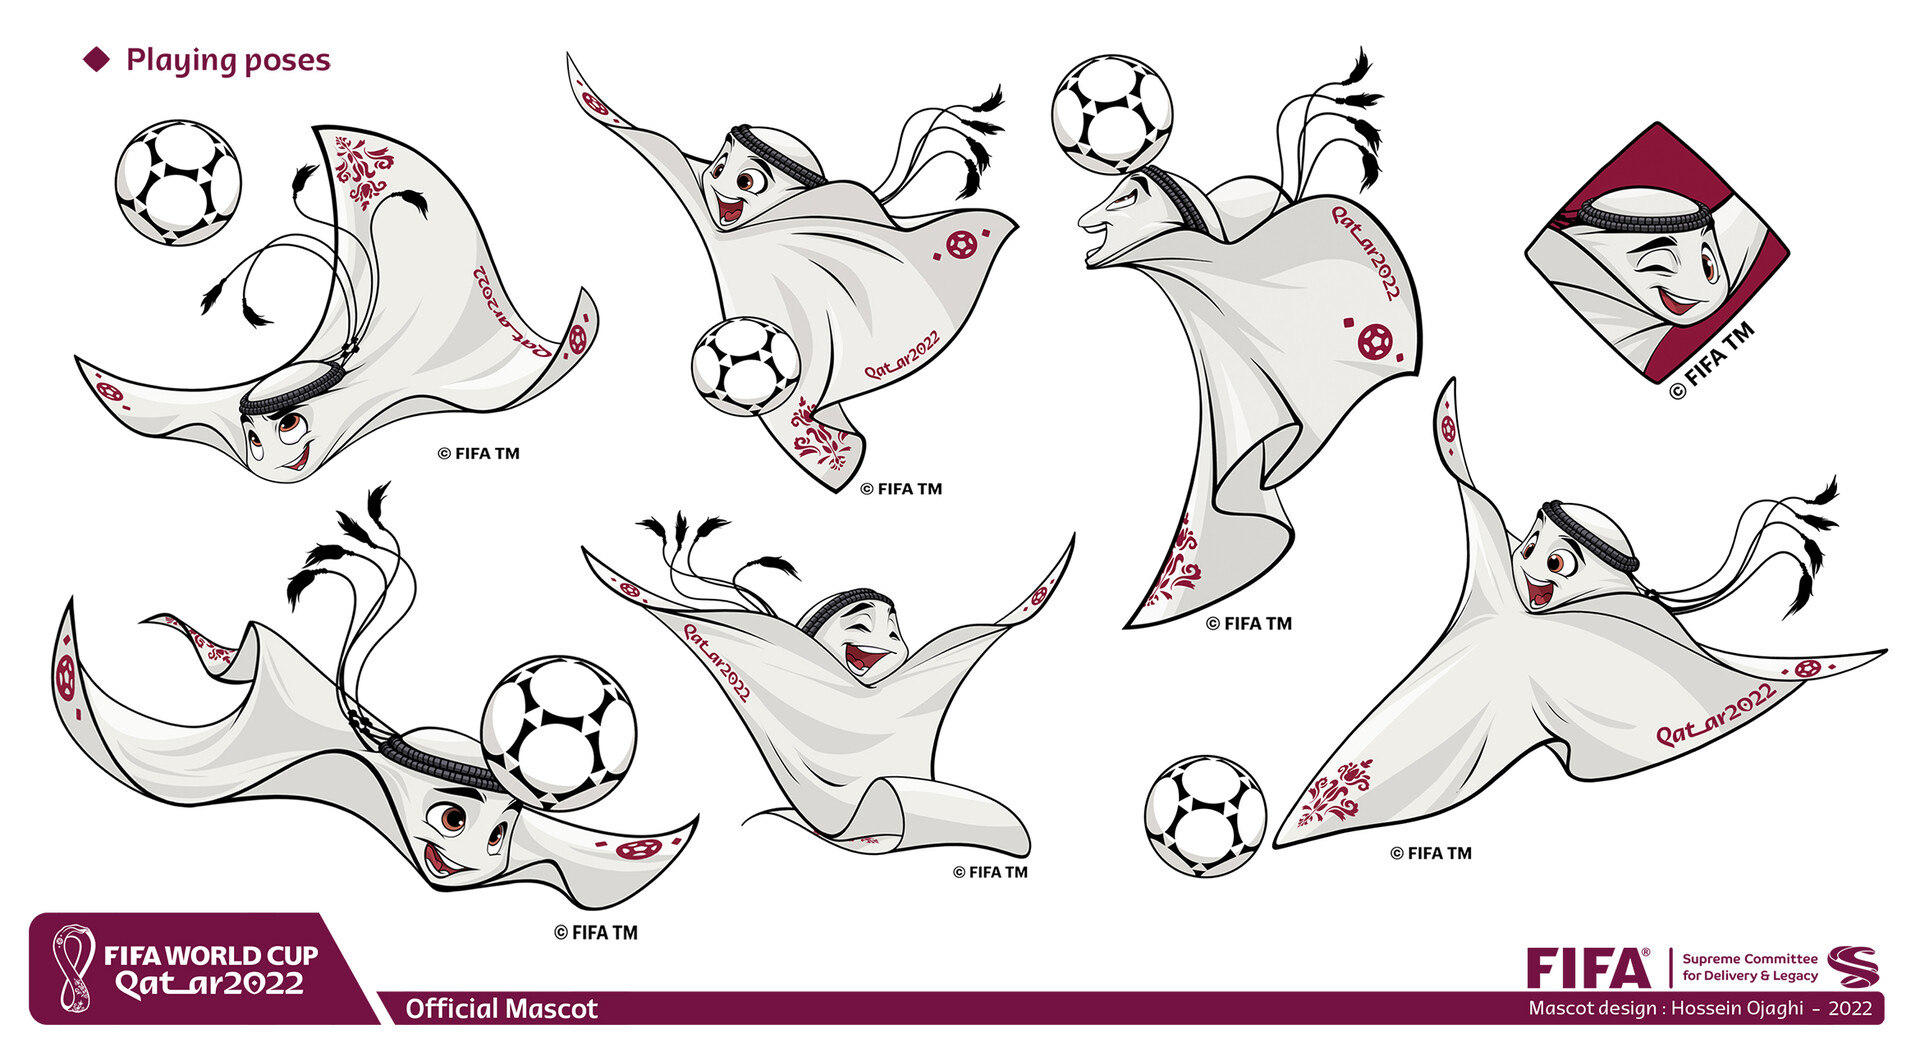 The Qatar World Cup mascot design is inspired by…a piece of